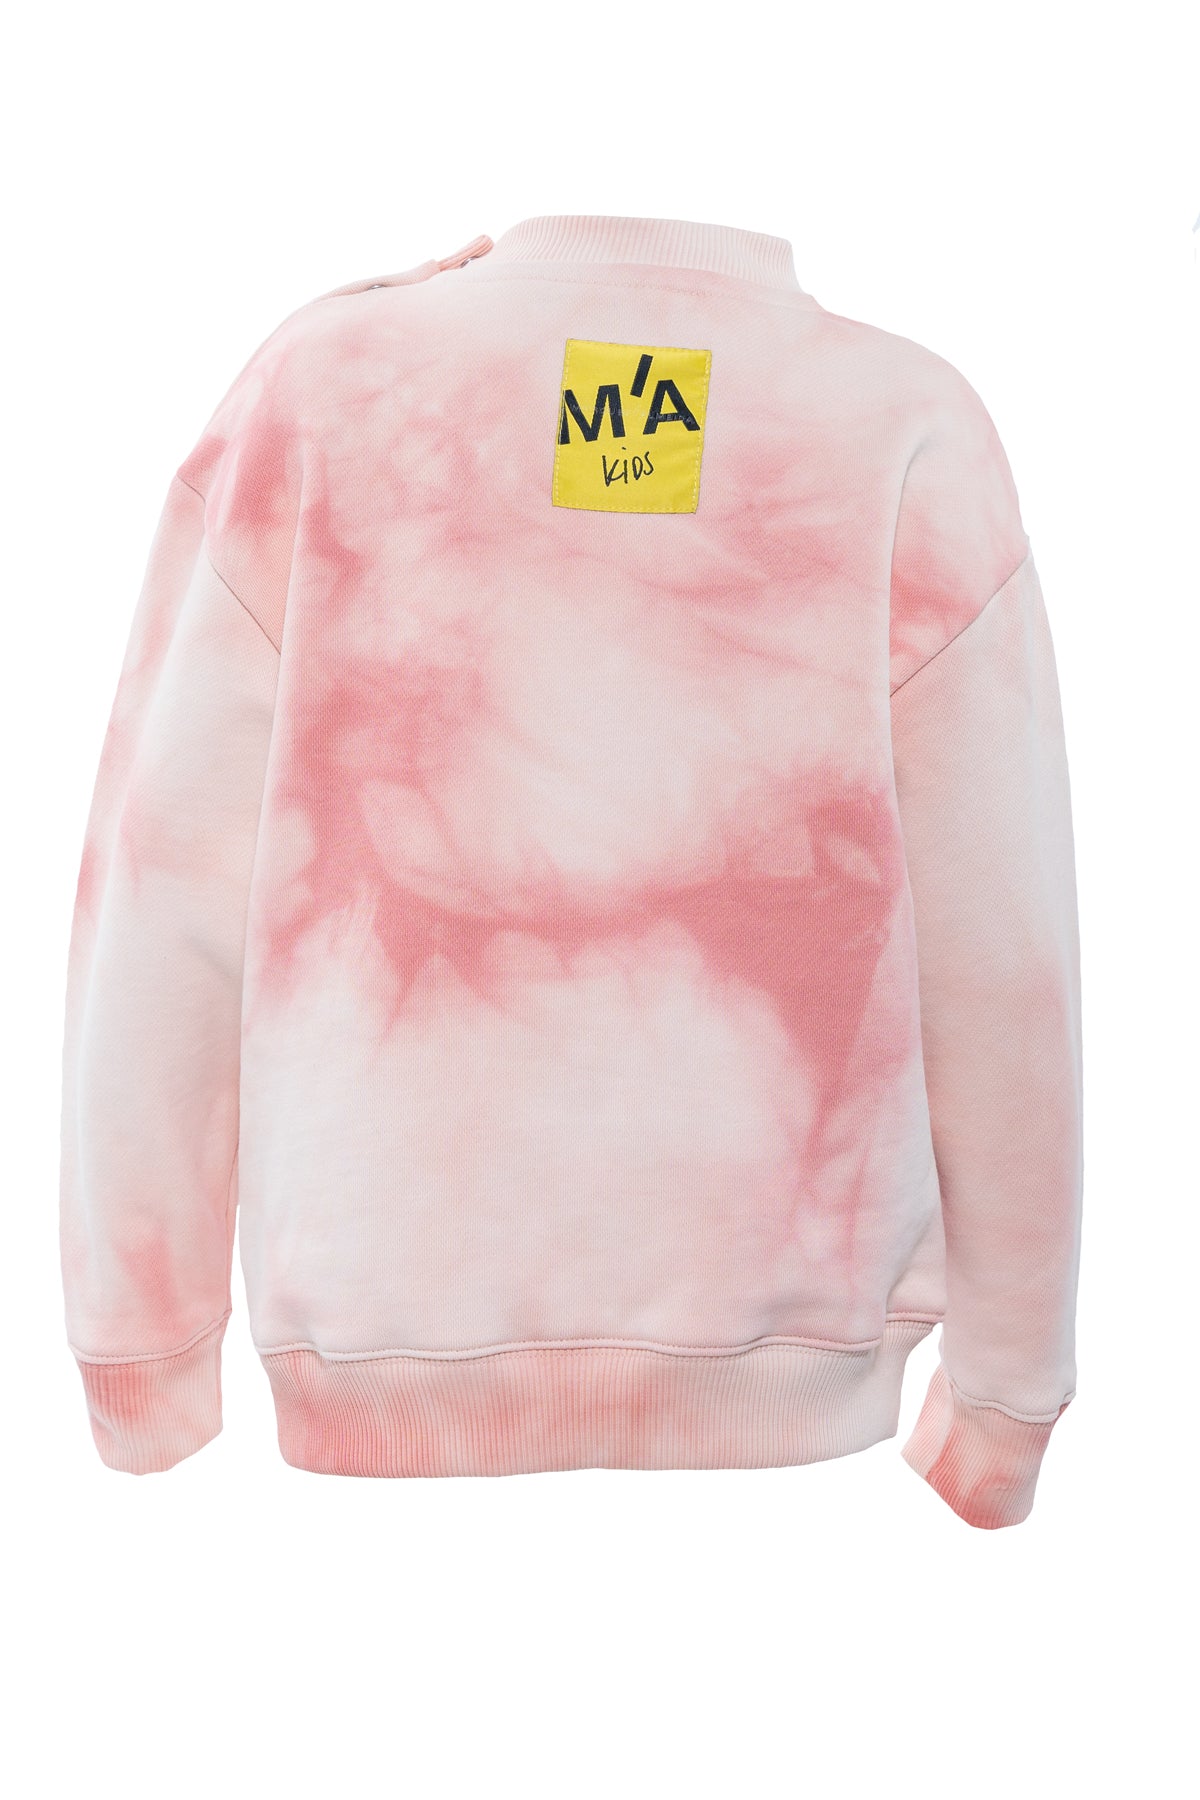 EMBROIDERED CREW NECK IN PINK TIE DYE ma kids